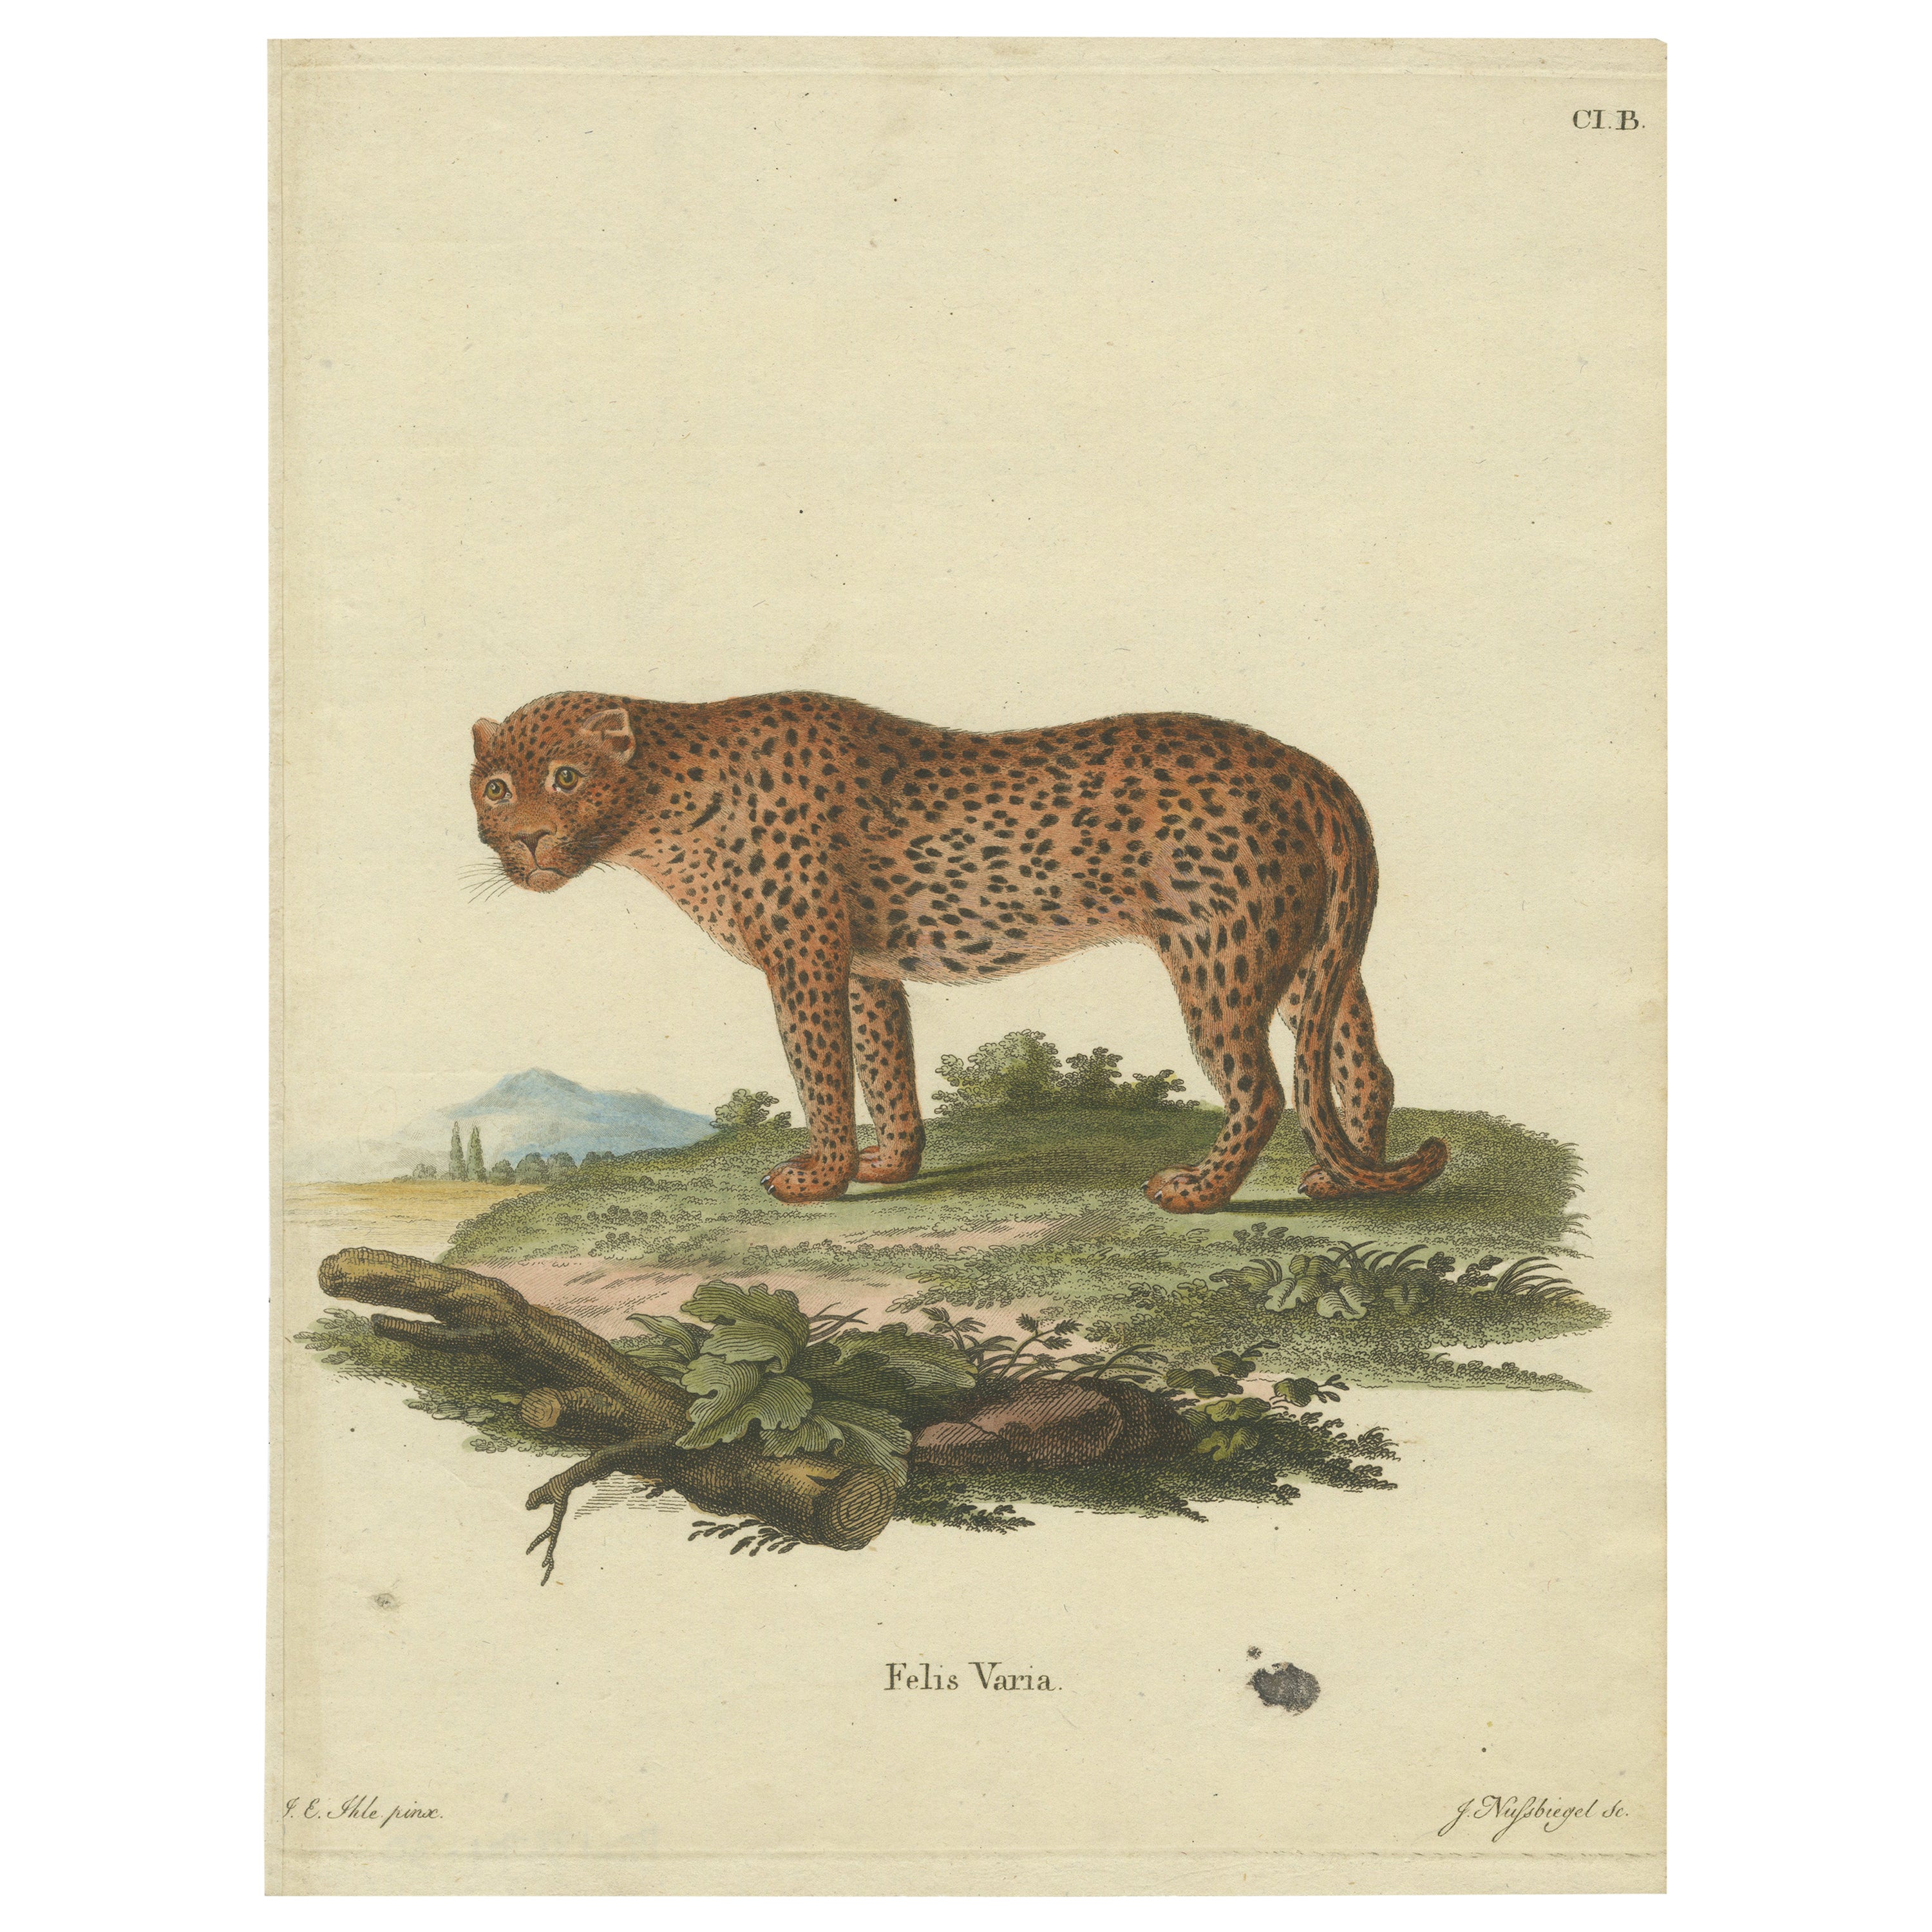 The Varied Panther of Nature's Palette in a Hand-Colored Engraving, crica 1850